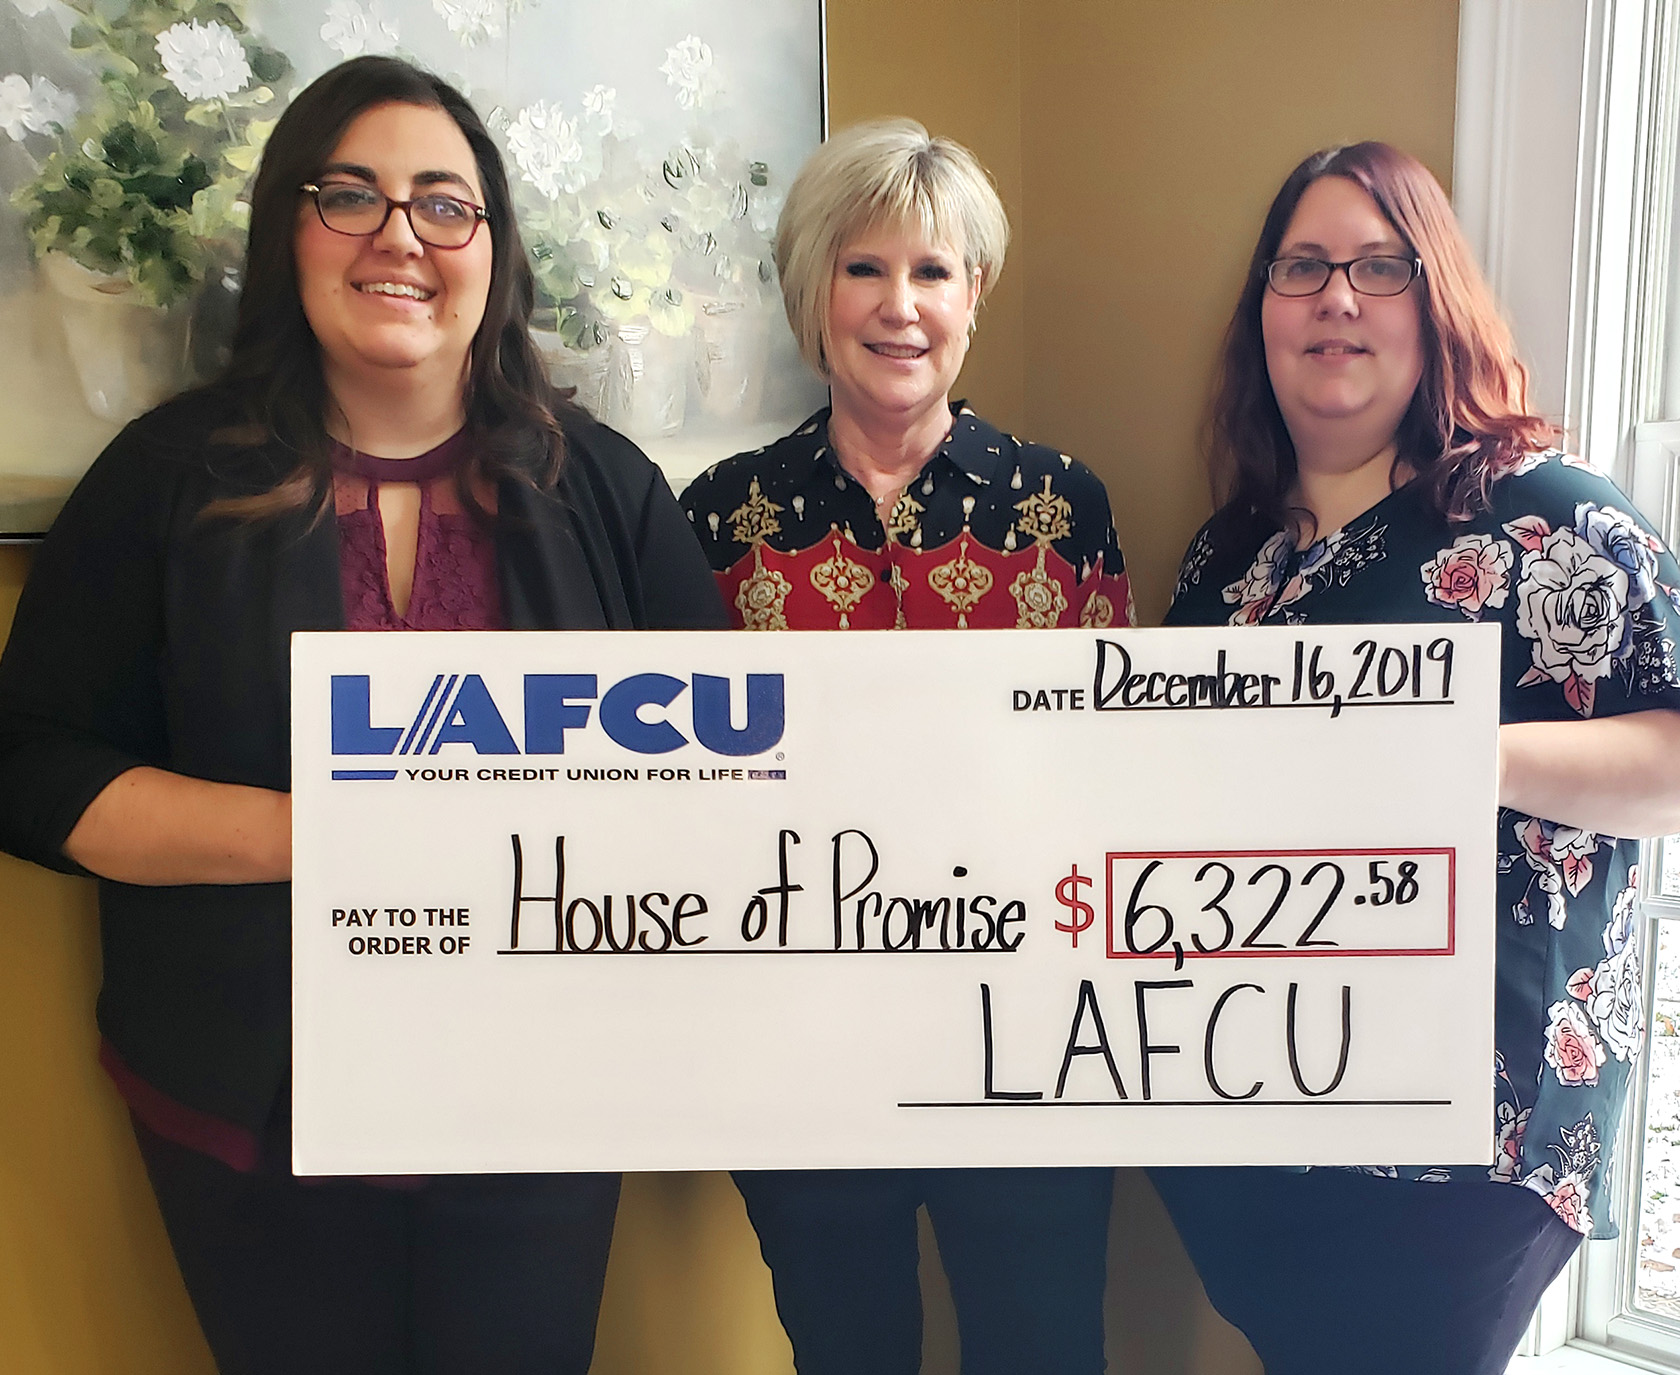 LAFCU-HouseofPromise.jpg – LAFCU's Amanda Seger, left, and Teri, right, present a check to Shari Montgomery of House of Promise in the amount of $6,322.50 from funds raised by LAFCU and its employees.